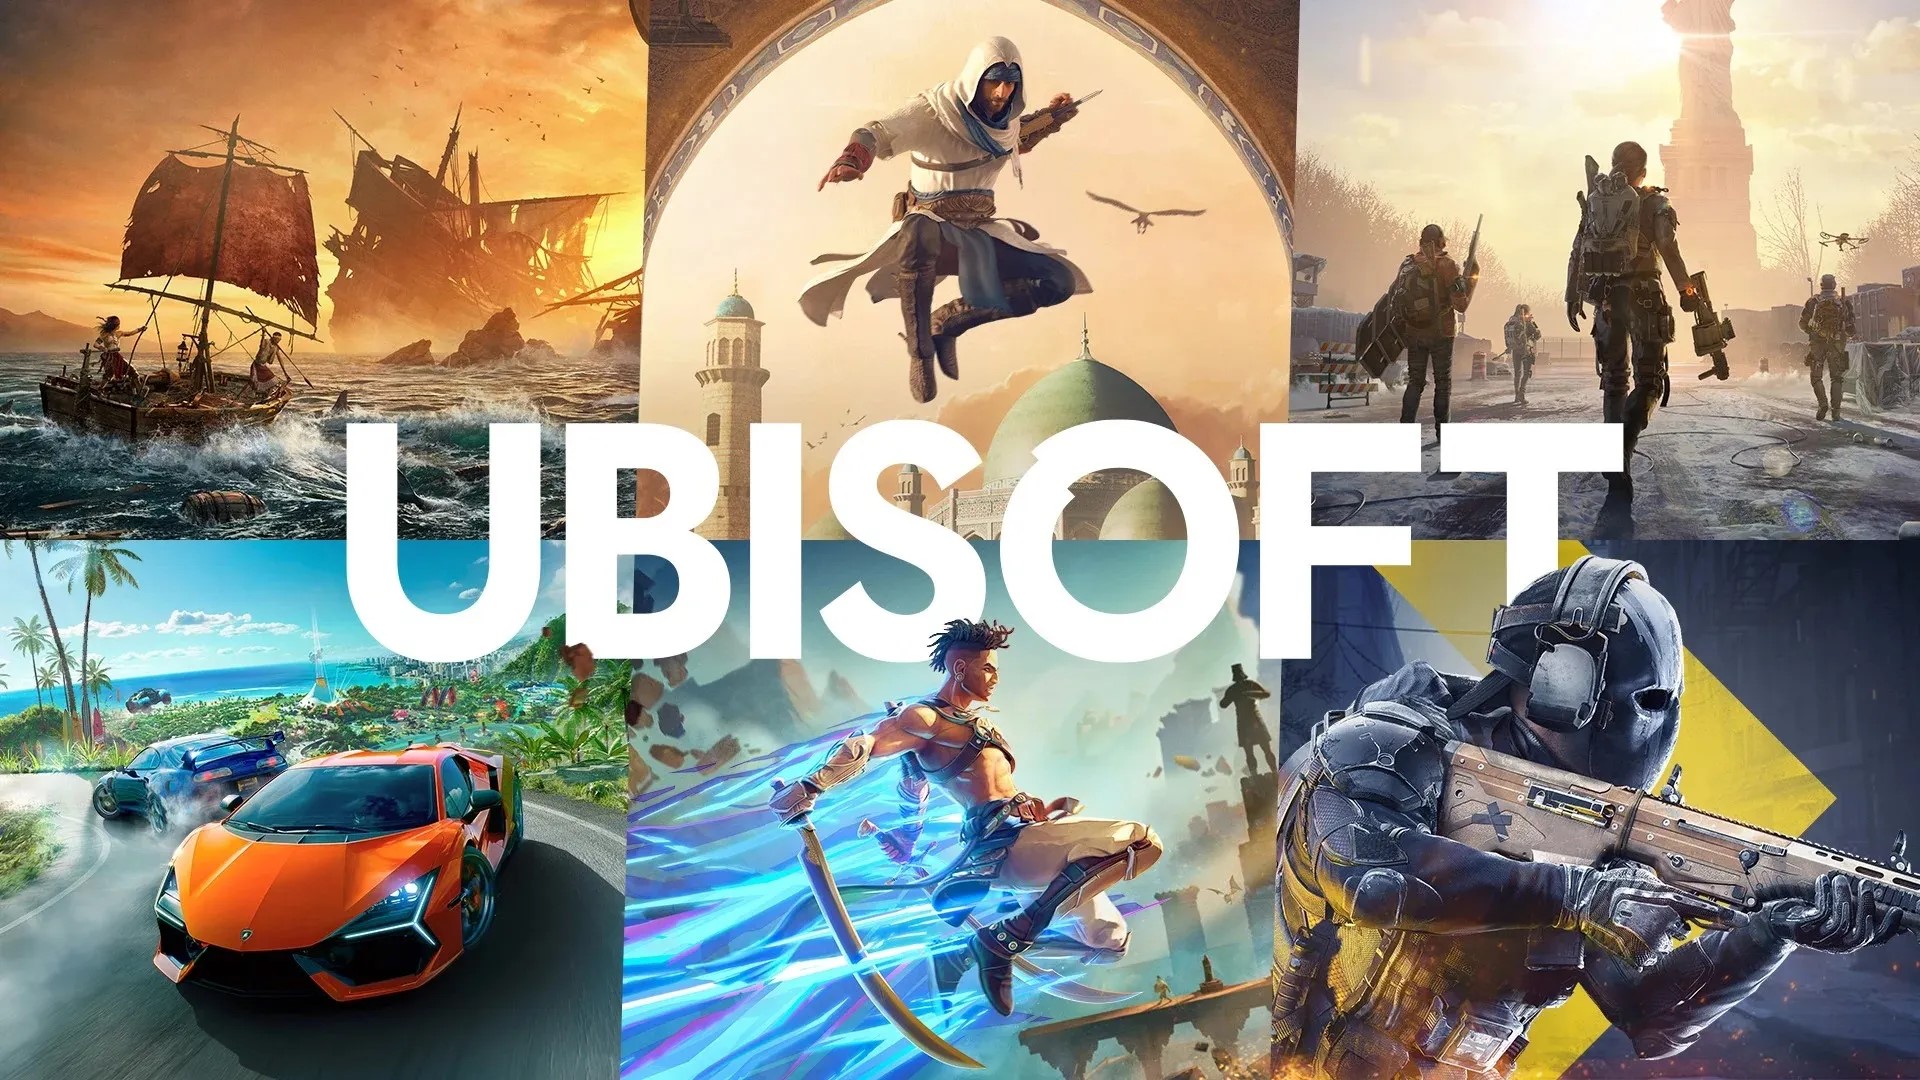 Ubisoft Reportedly Escapes From Attackers That Tried To “Exfiltrate Roughly 900GB Of Data”